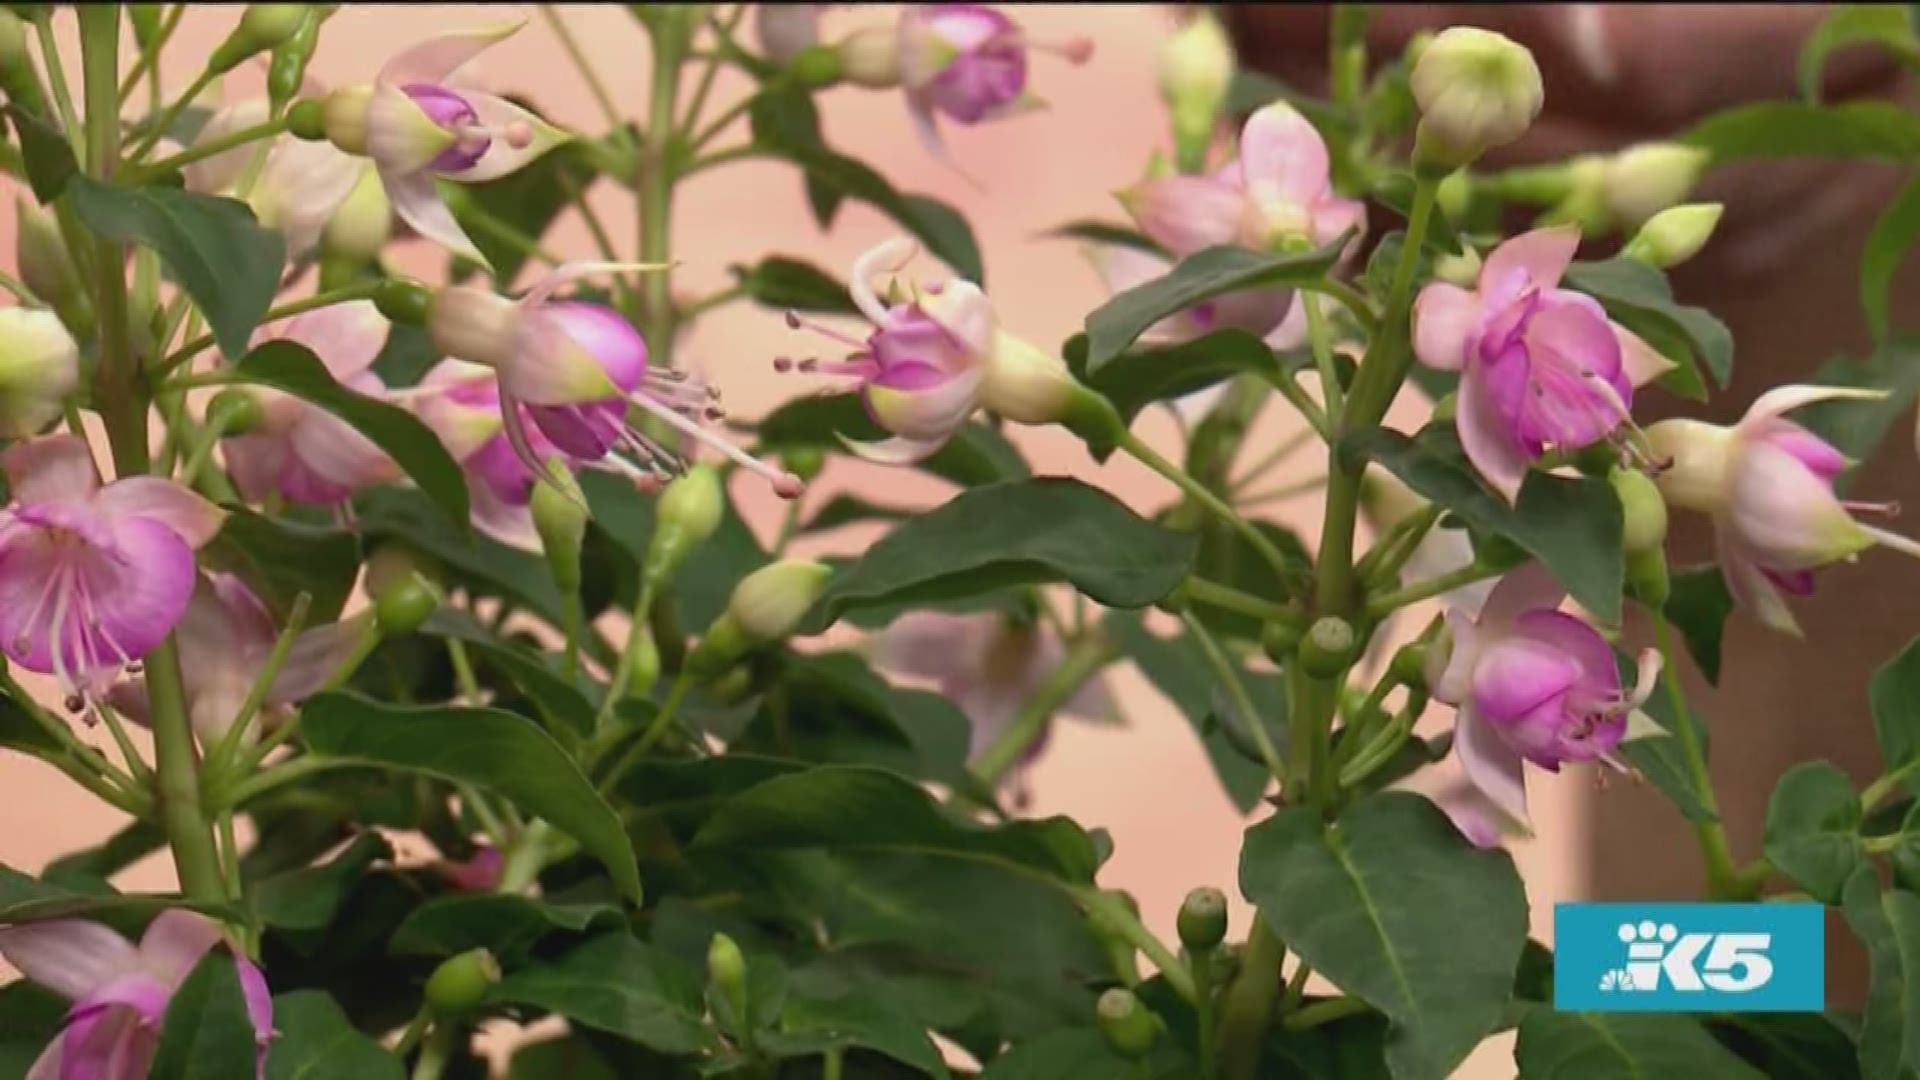 Fuchsias are popular in hanging baskets, but can also give plentiful splashes of color throughout your garden. Gardening guru Ciscoe Morris explains the secrets to making them thrive.